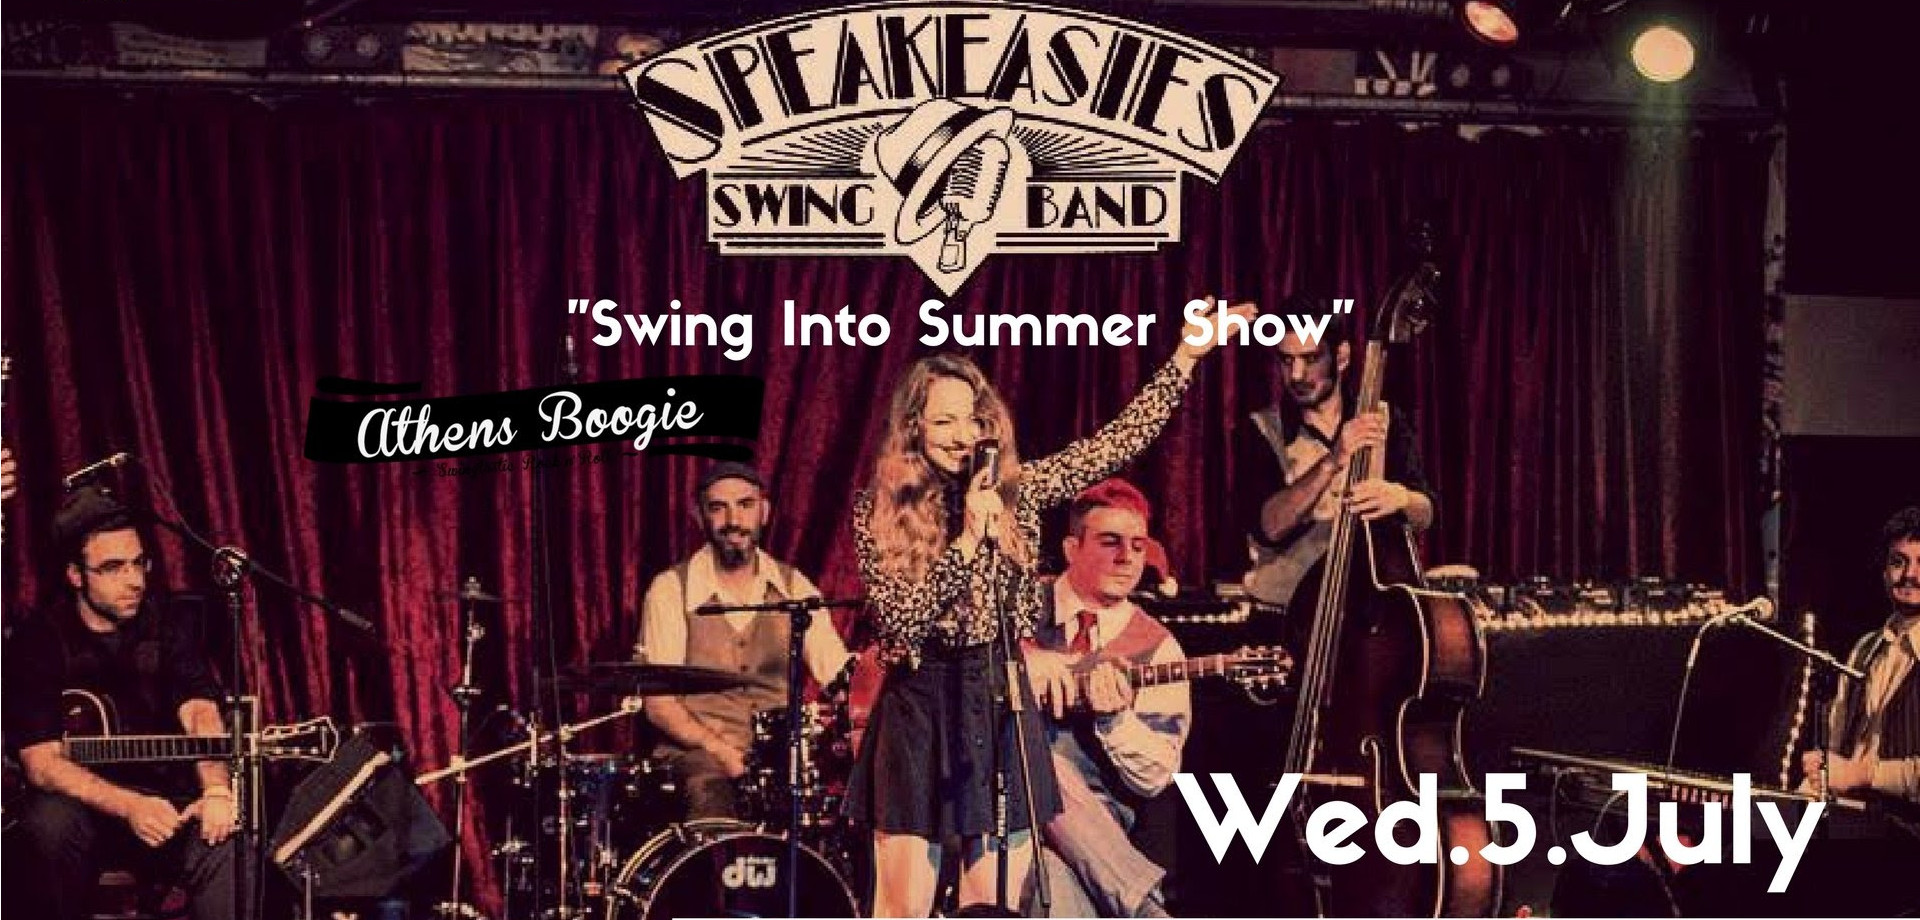 The Speakeasies Swing Band & Athens Boogie